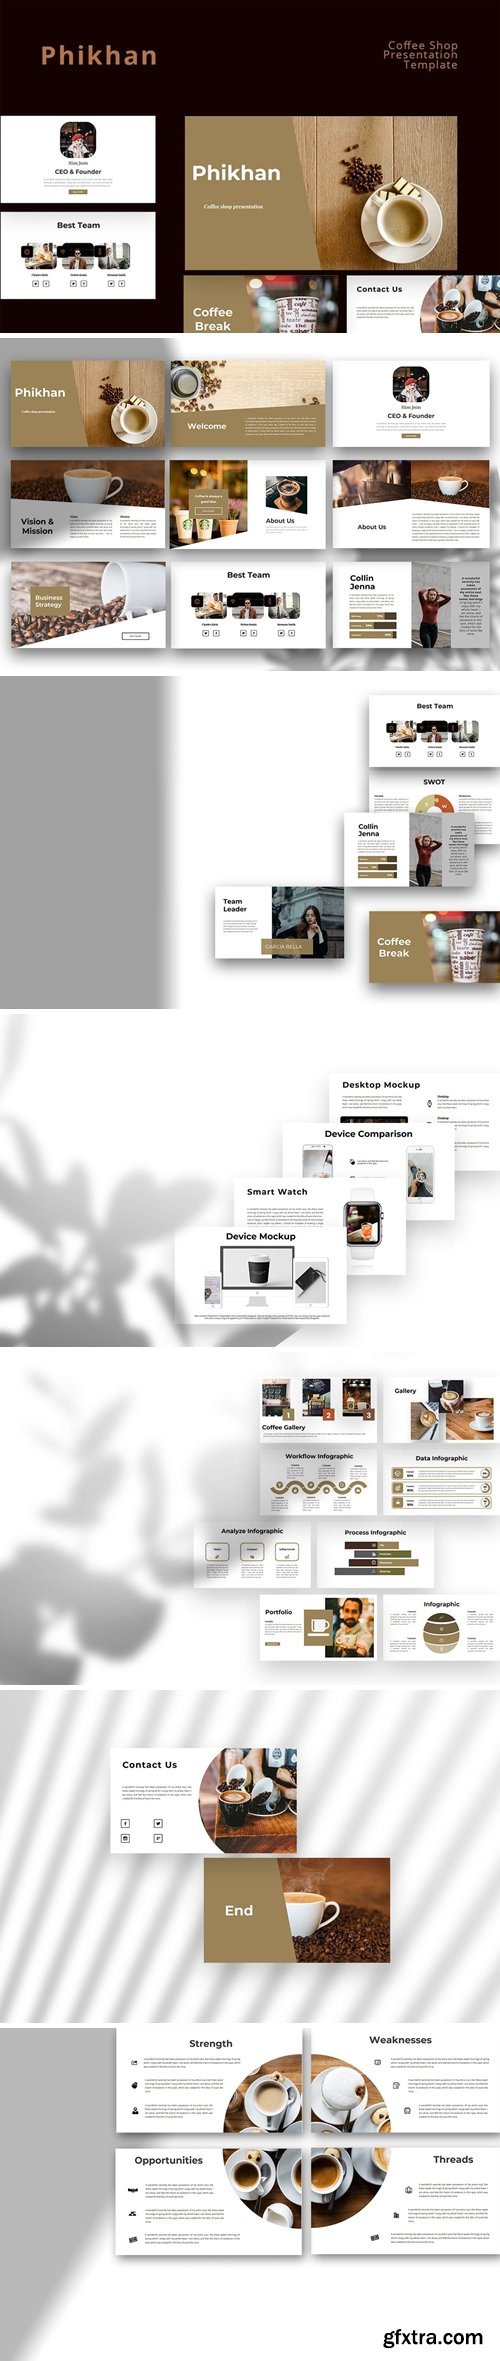 Phikhan - Coffee Shop Powerpoint, Keynote and Google Slides Templates